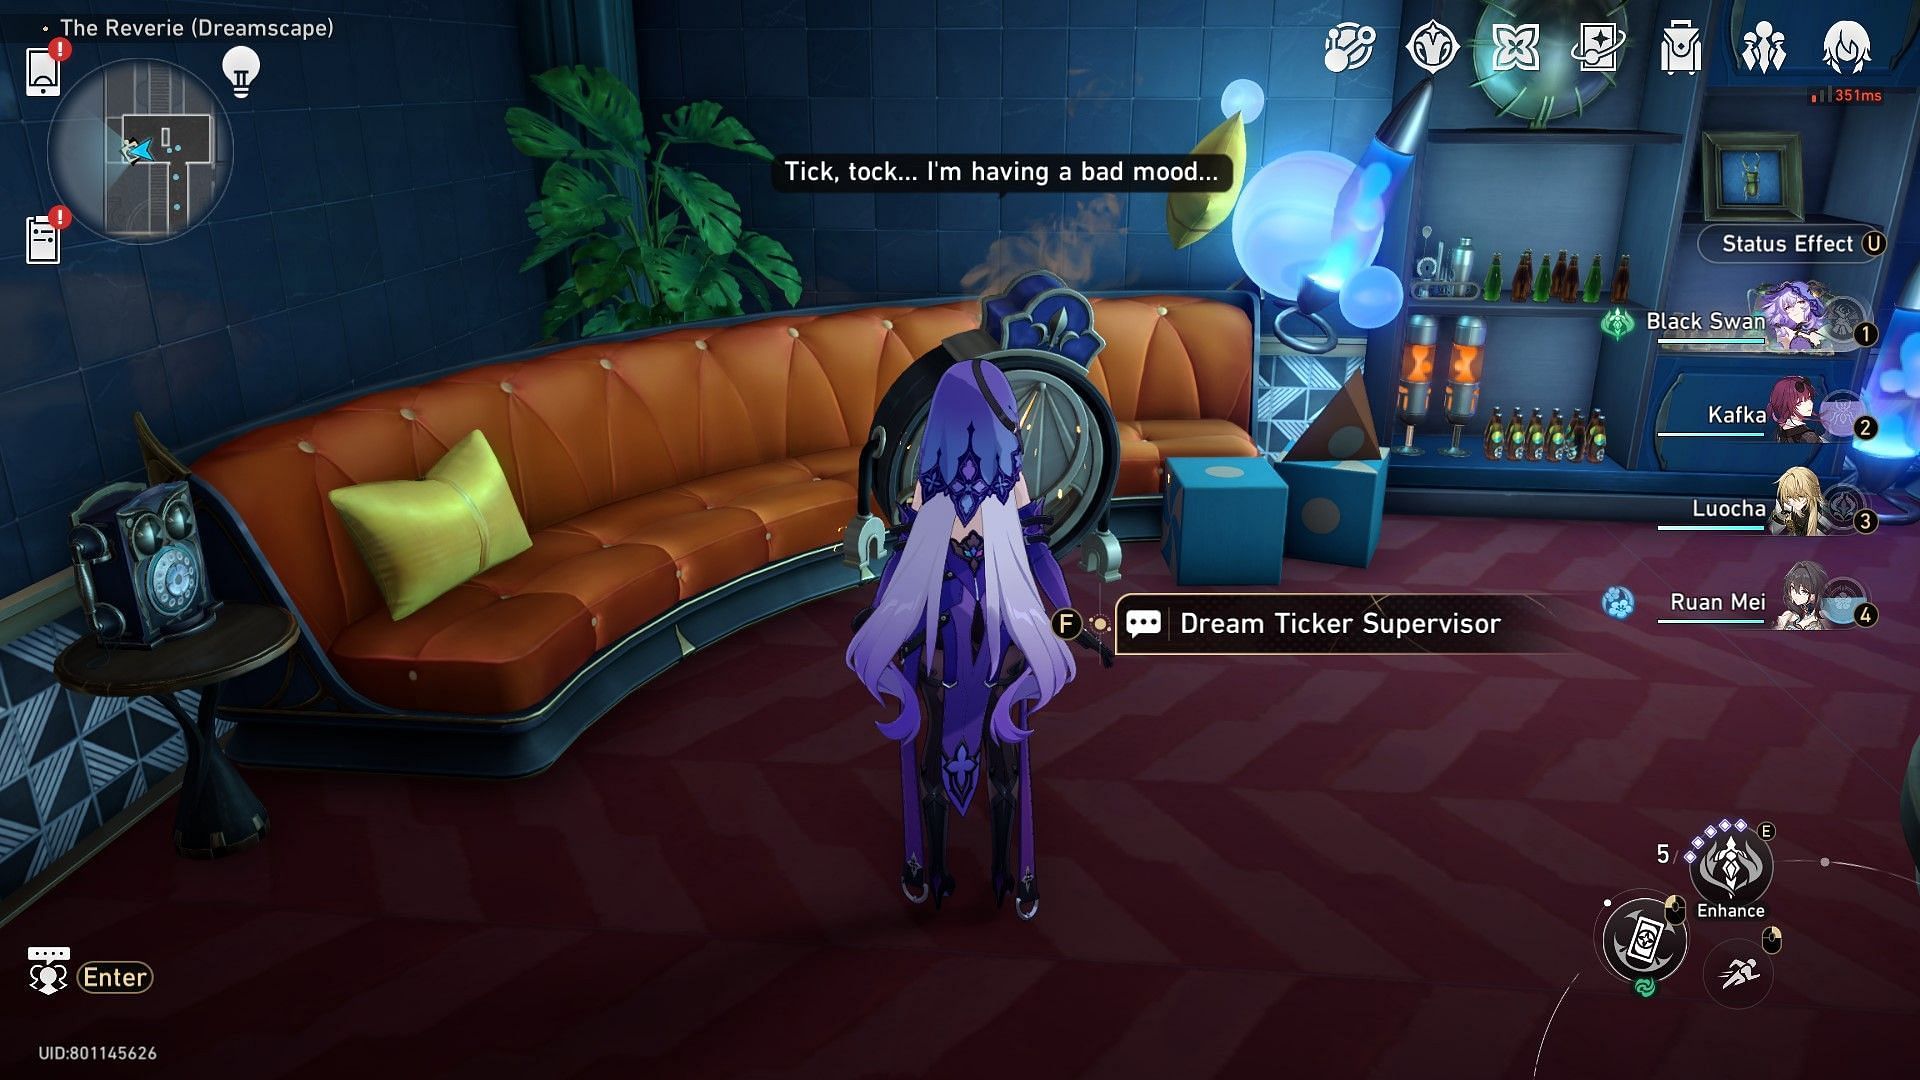 You will find this particular NPC in The Reverie - Dreamscape (Image via HoYoverse)